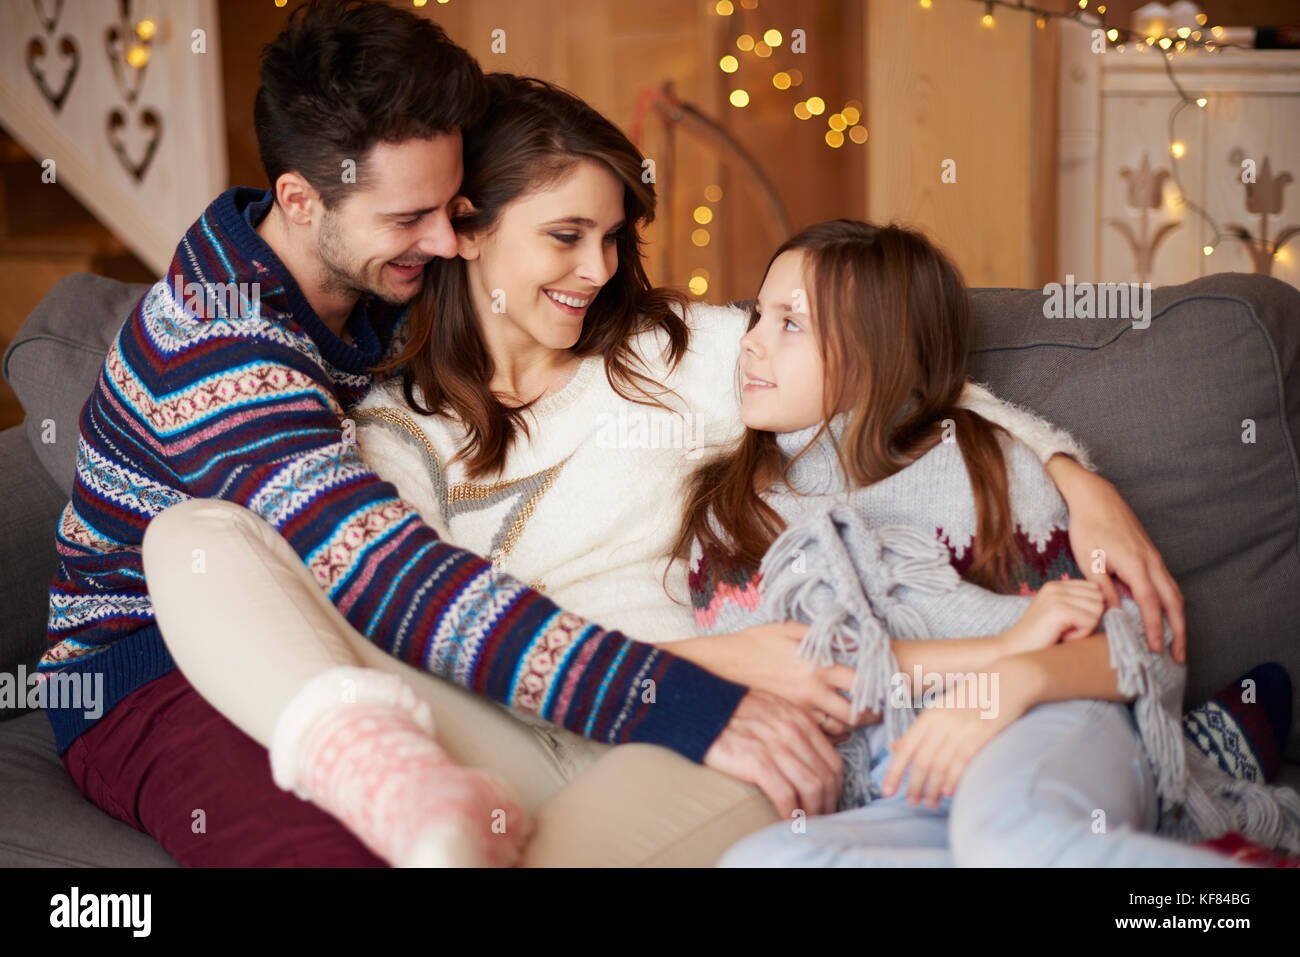 Family love and winter time Stock Photo